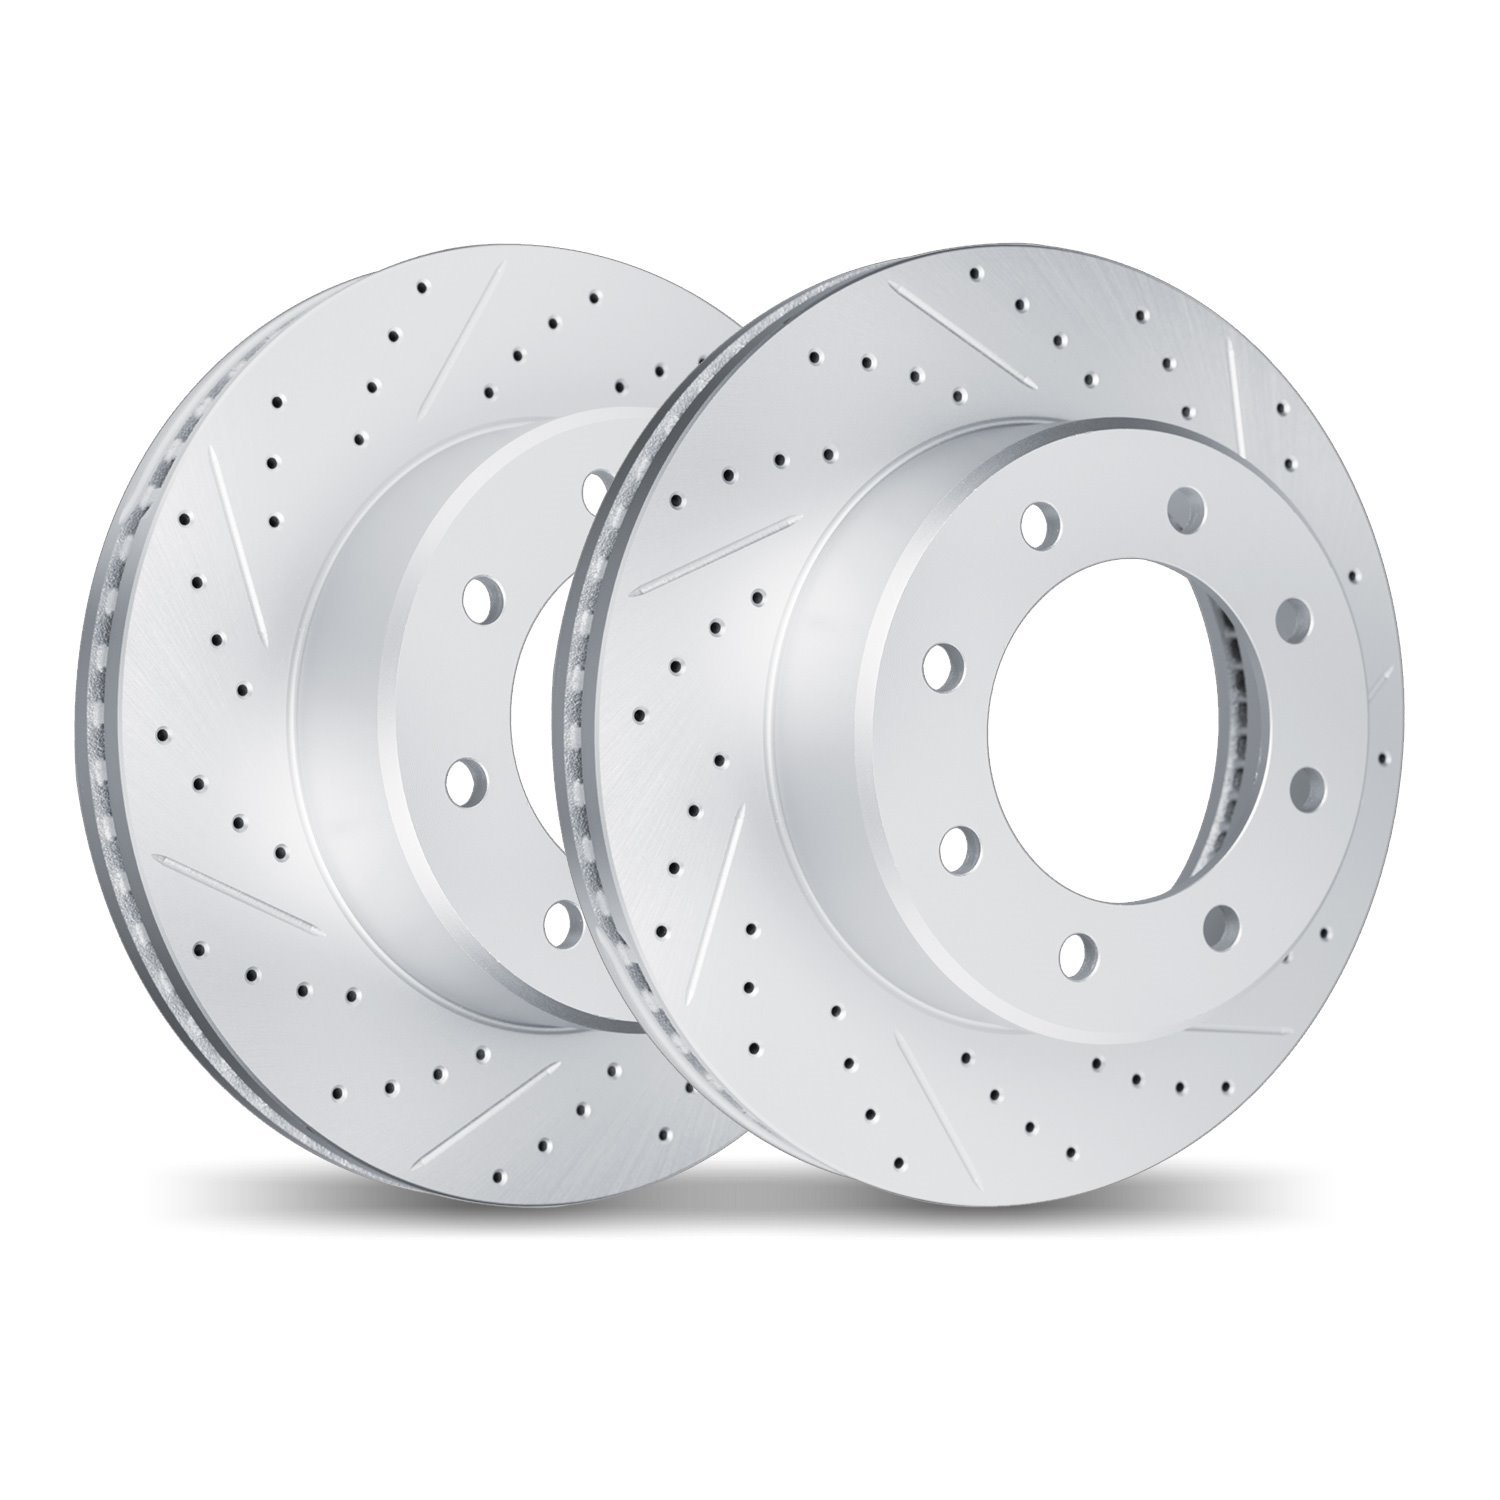 2002-54060 Geoperformance Drilled/Slotted Brake Rotors, 1980-1994 Ford/Lincoln/Mercury/Mazda, Position: Front